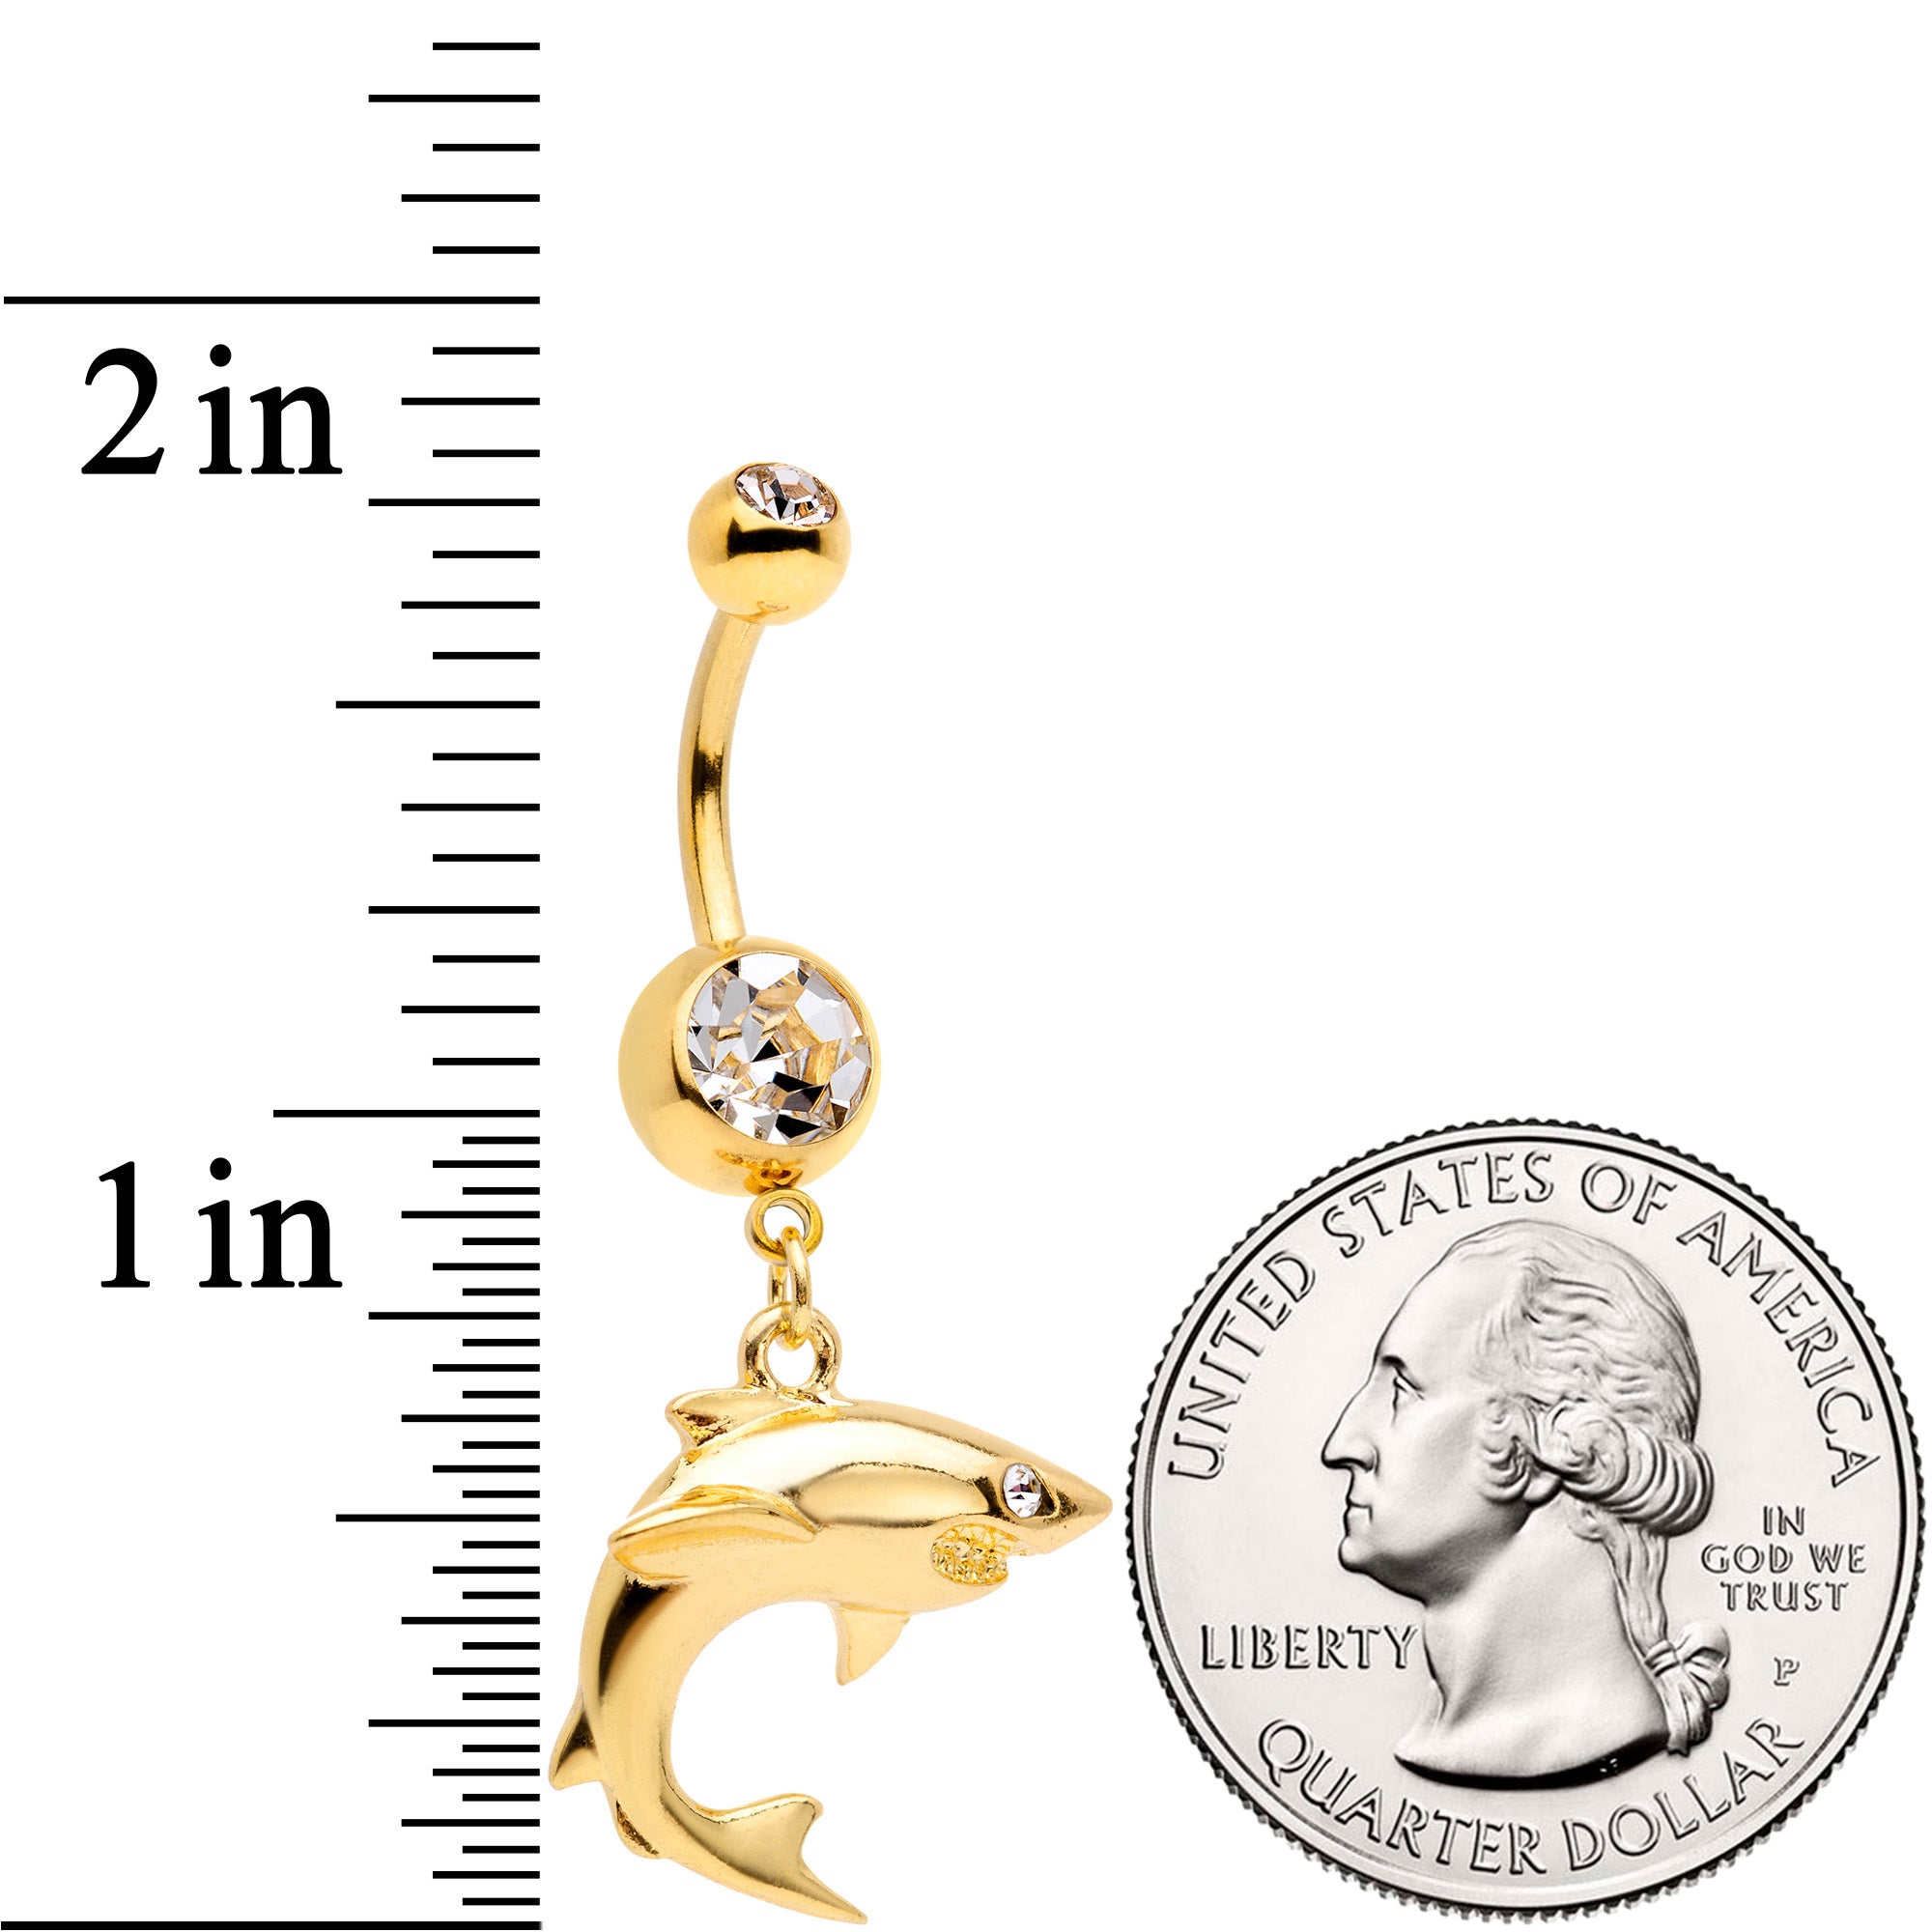 Clear Gem Gold Tone Toothy Shark Dangle Belly Ring